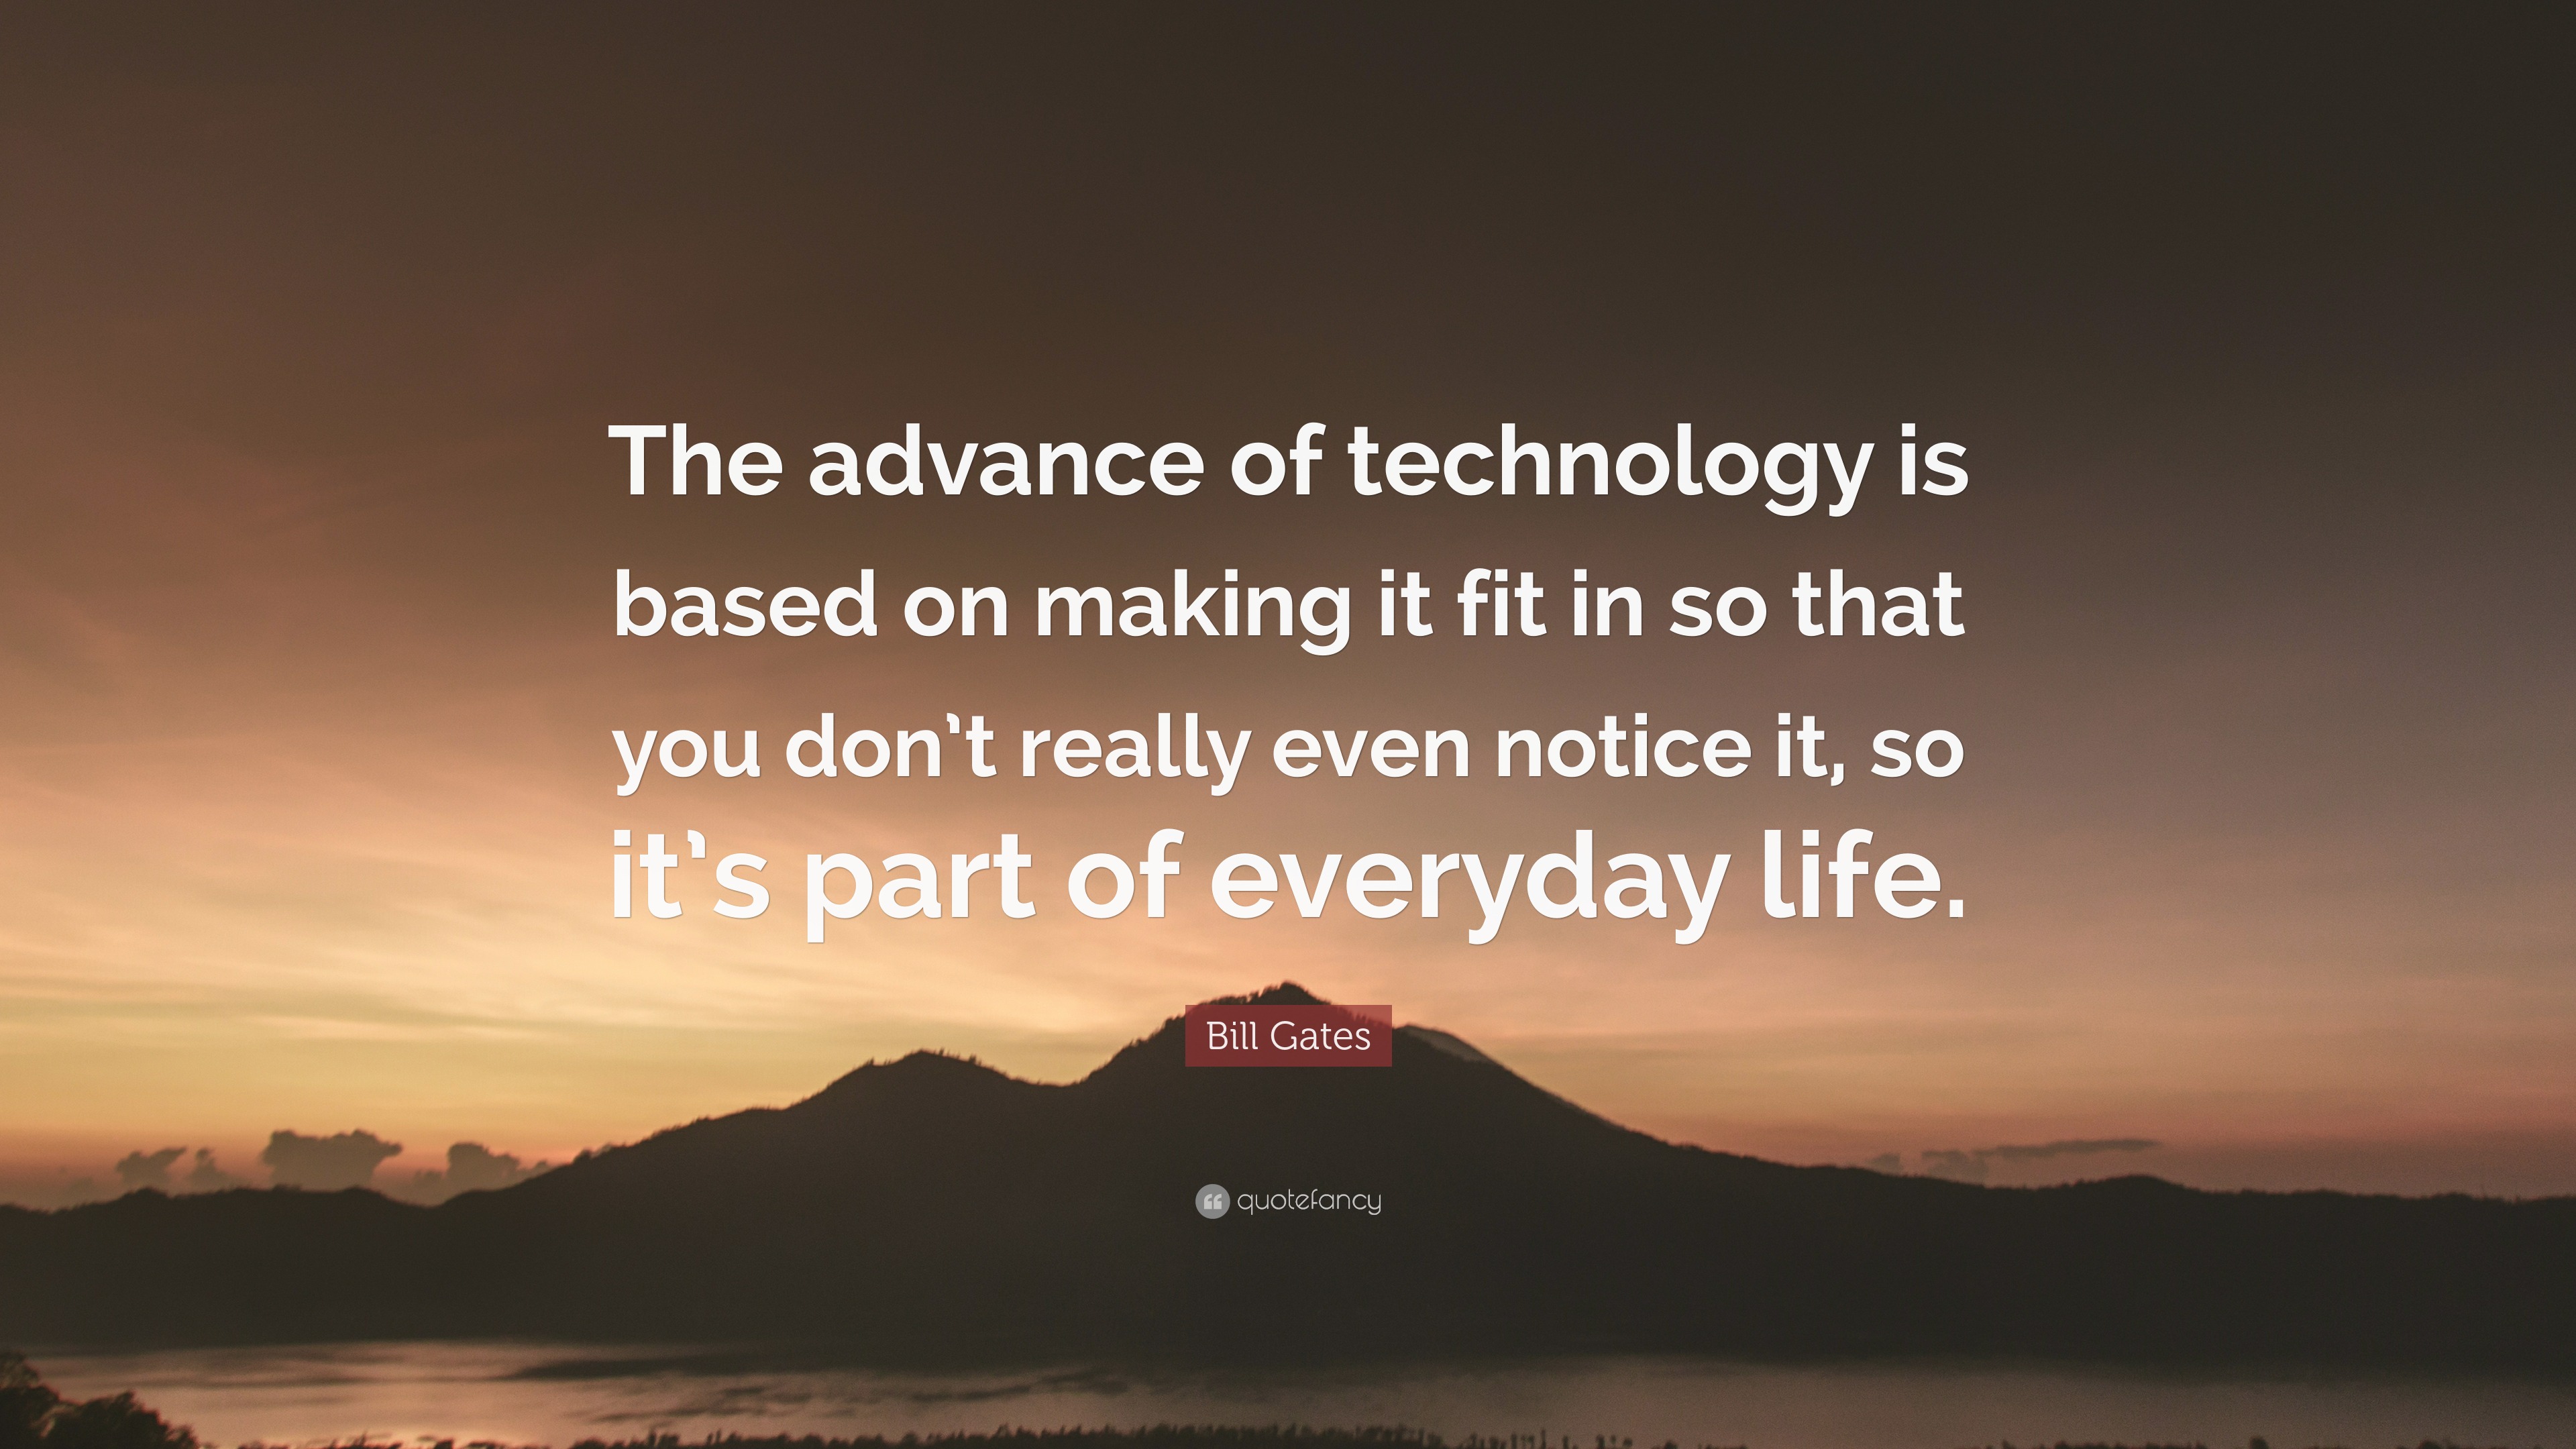 Bill Gates Quote: “The advance of technology is based on making it fit ...